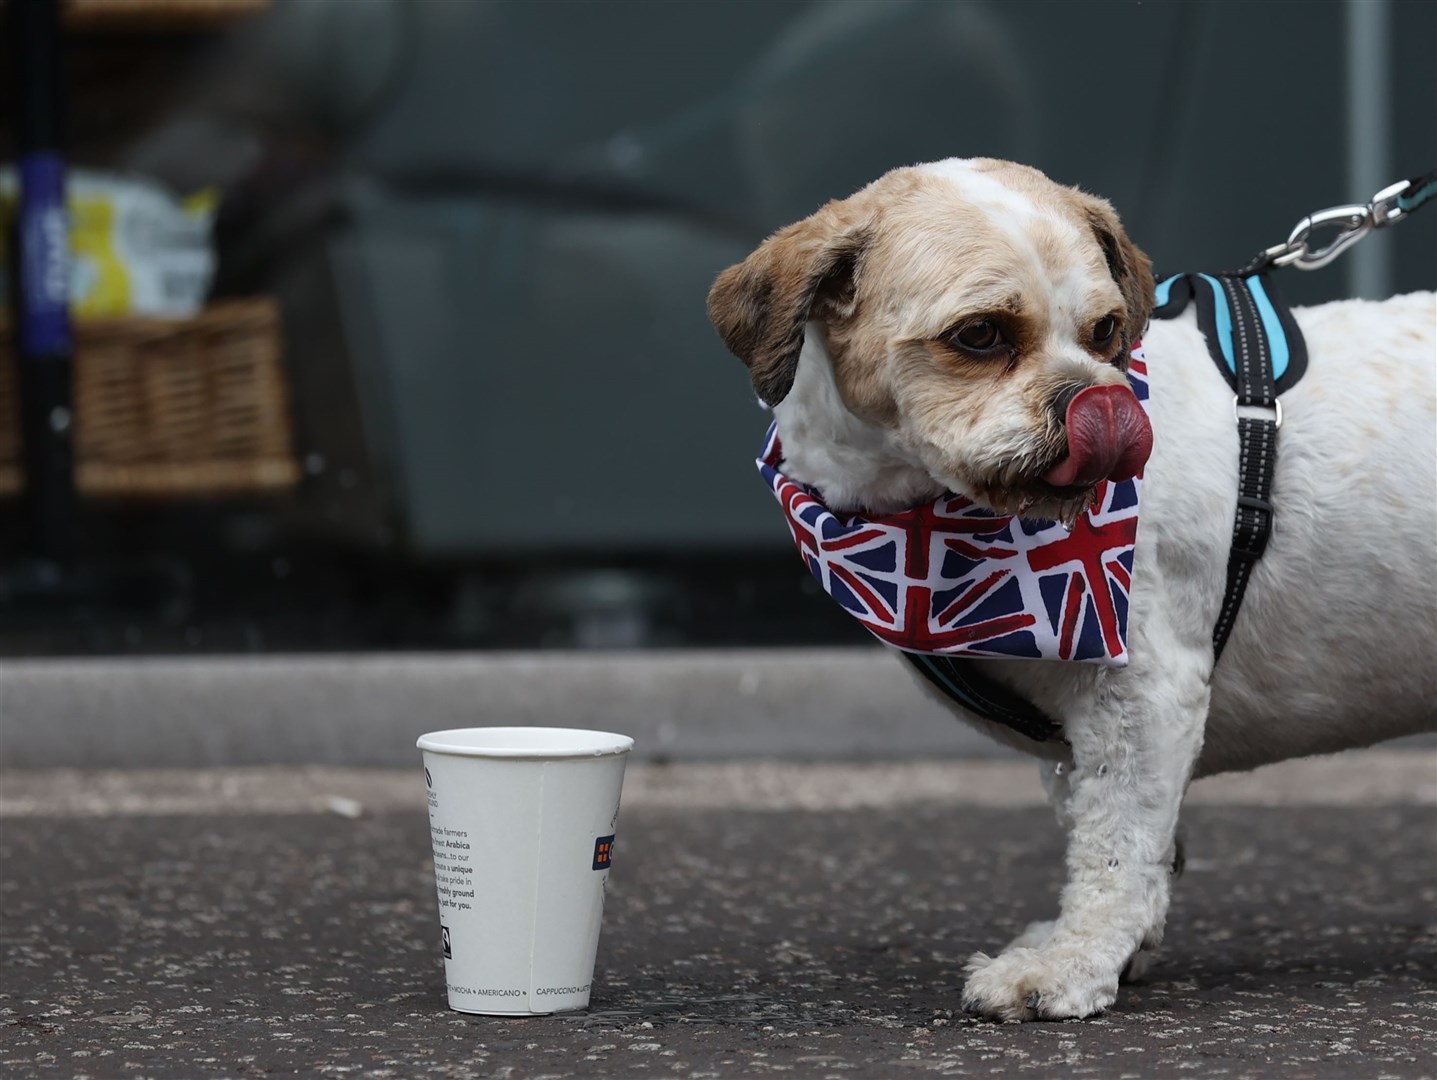 Four-year-old dog Barney takes some water from a cup during the hot weather in Belfast (Liam McBurney/PA)